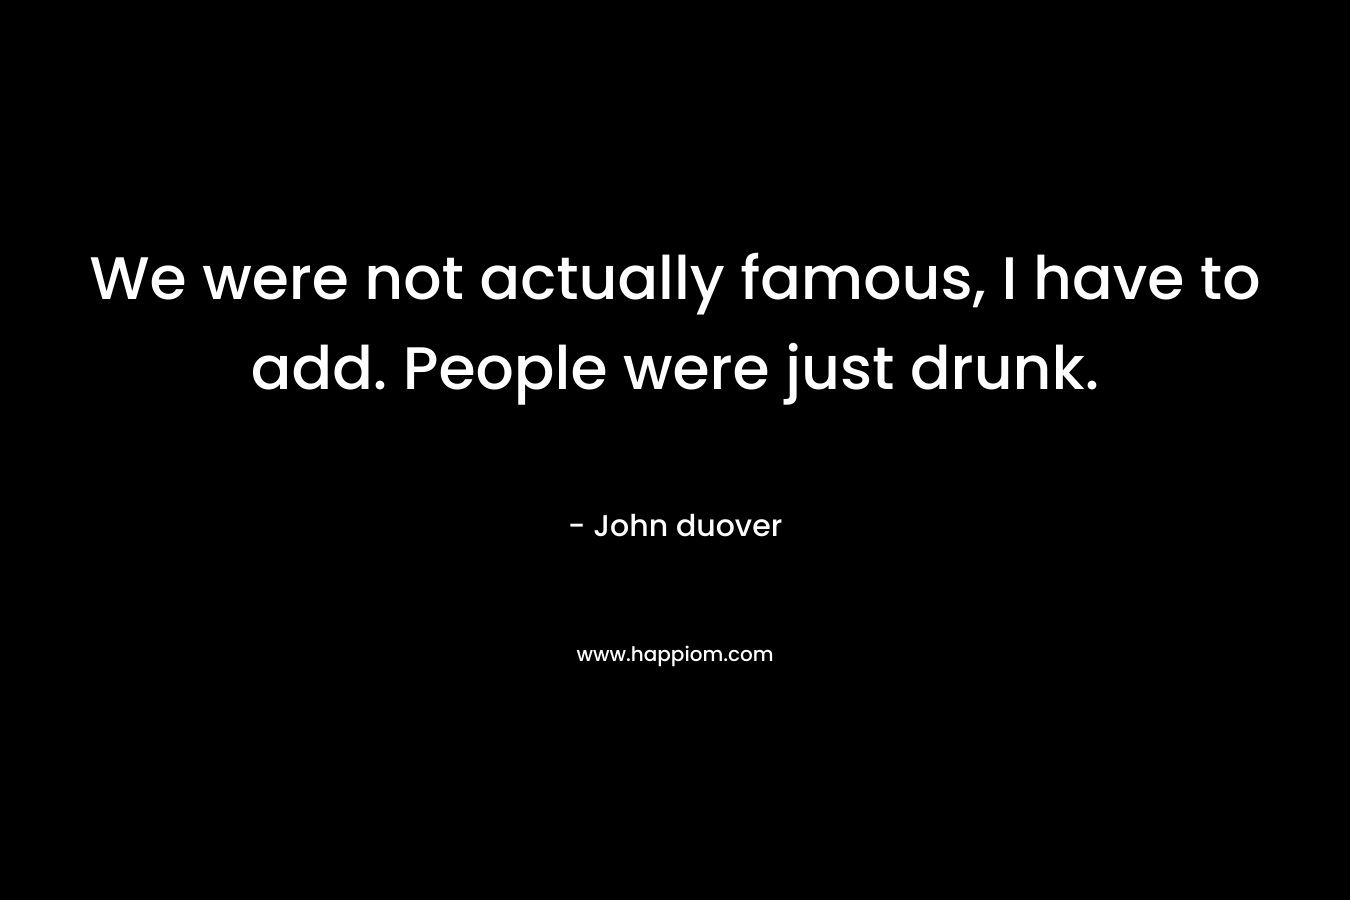 We were not actually famous, I have to add. People were just drunk. – John duover